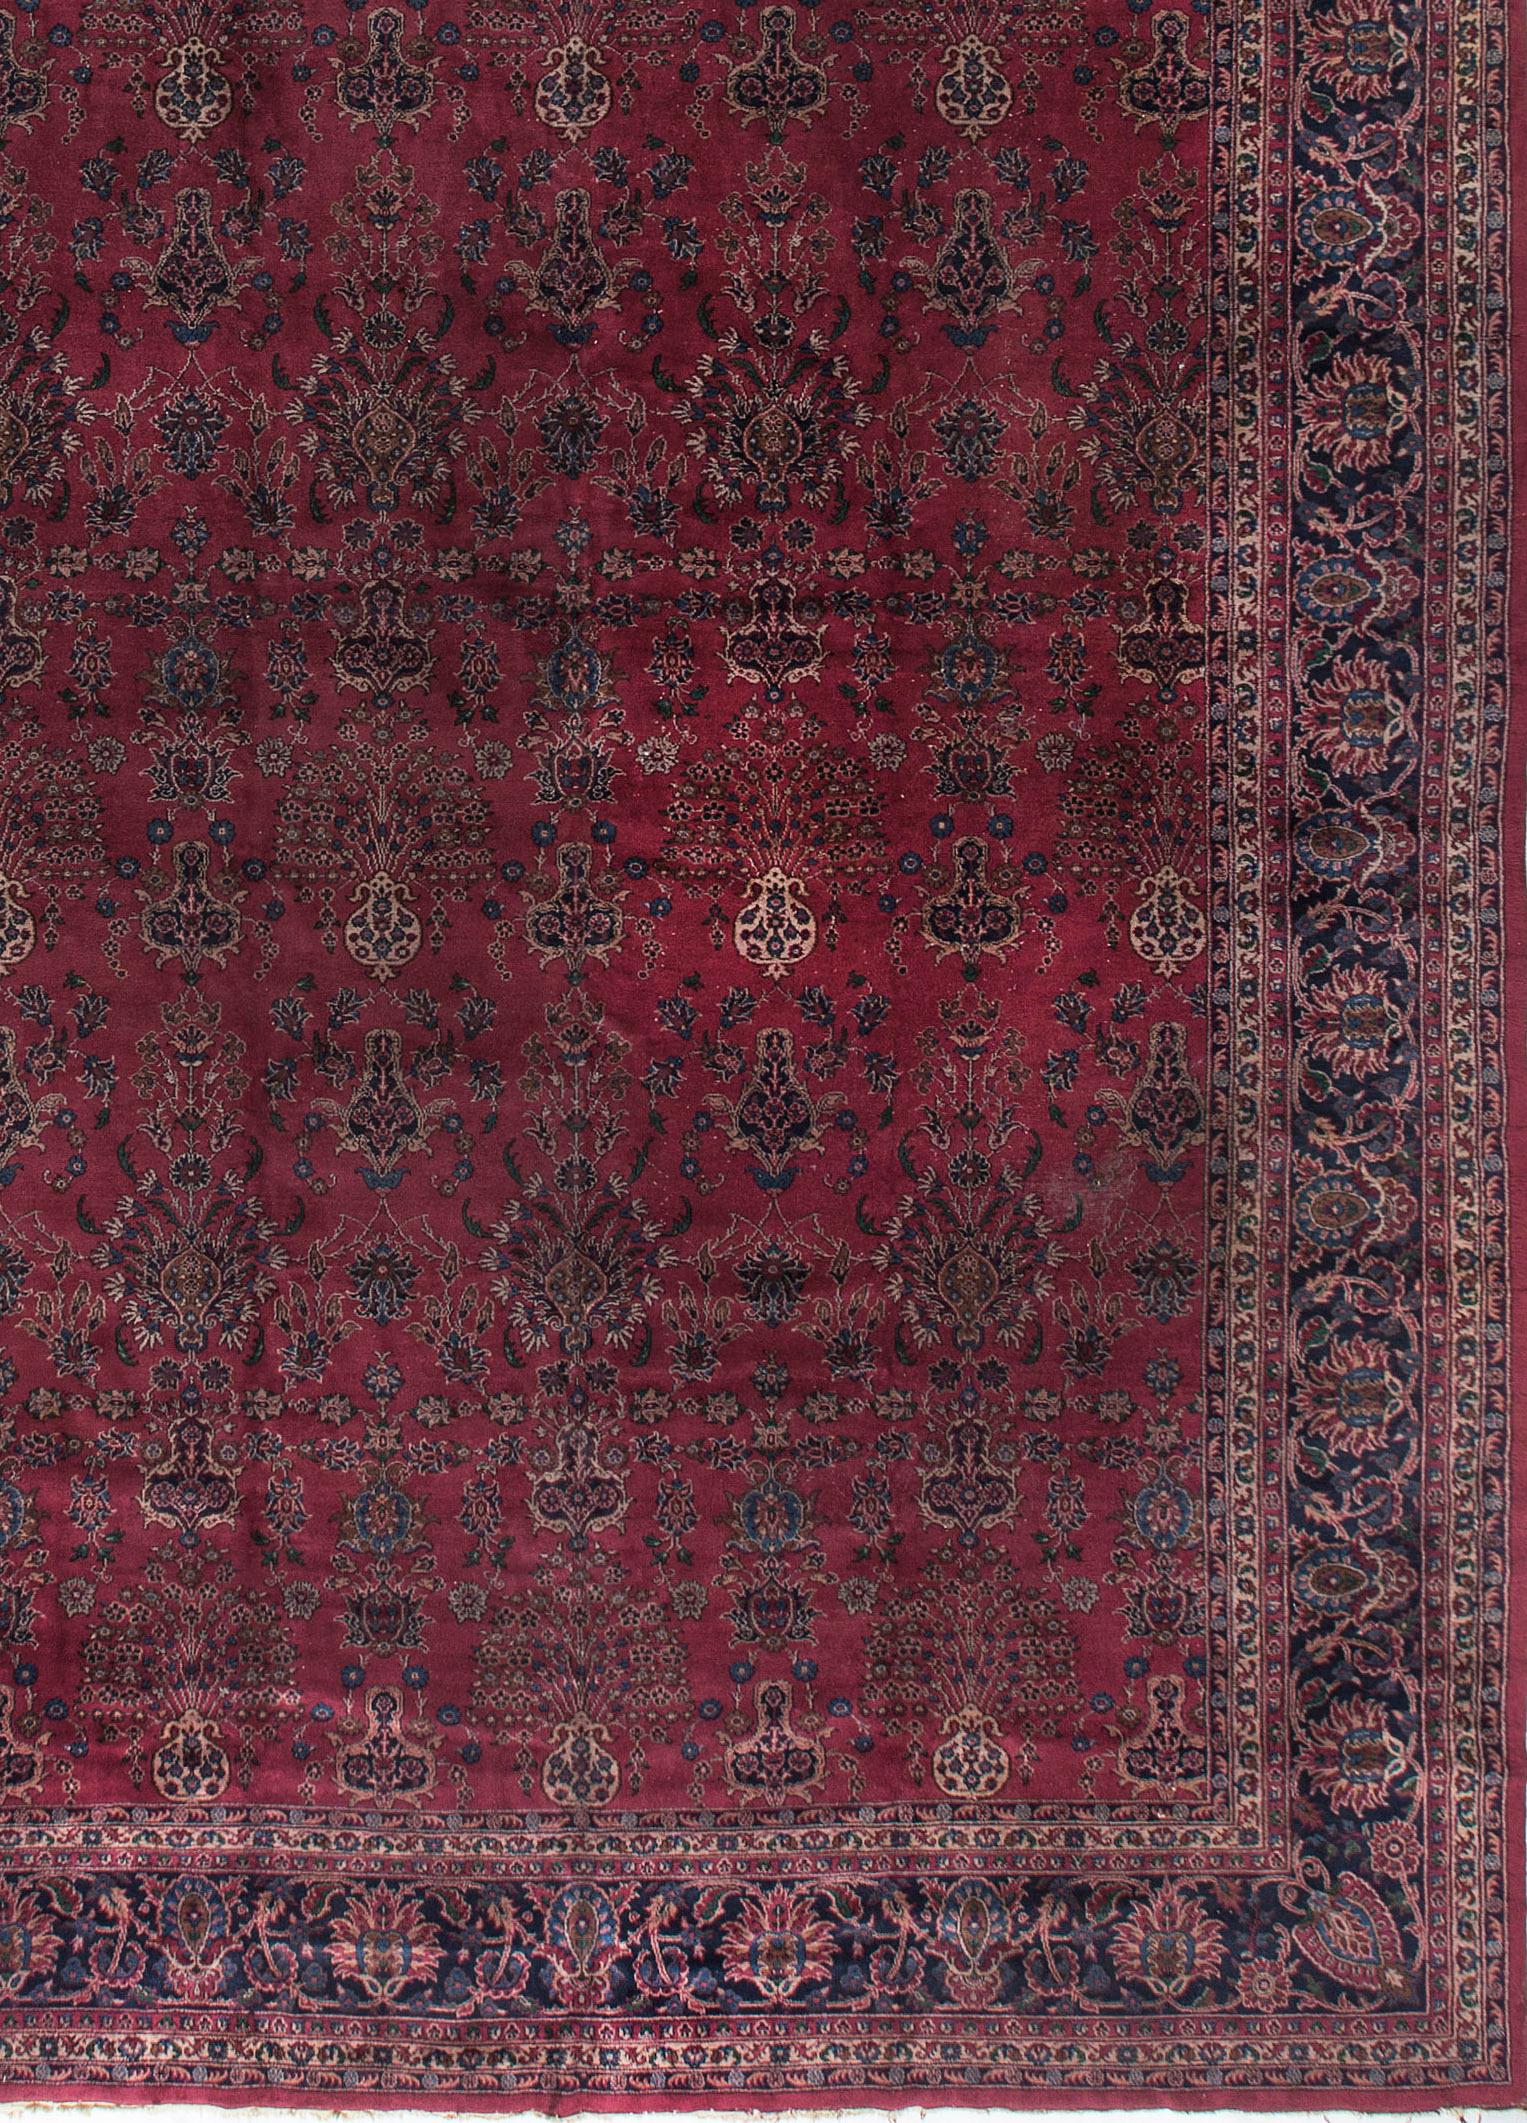 Hand-Woven Antique Persian Kashan Rug, circa 1900 13'8 x 22'1 For Sale